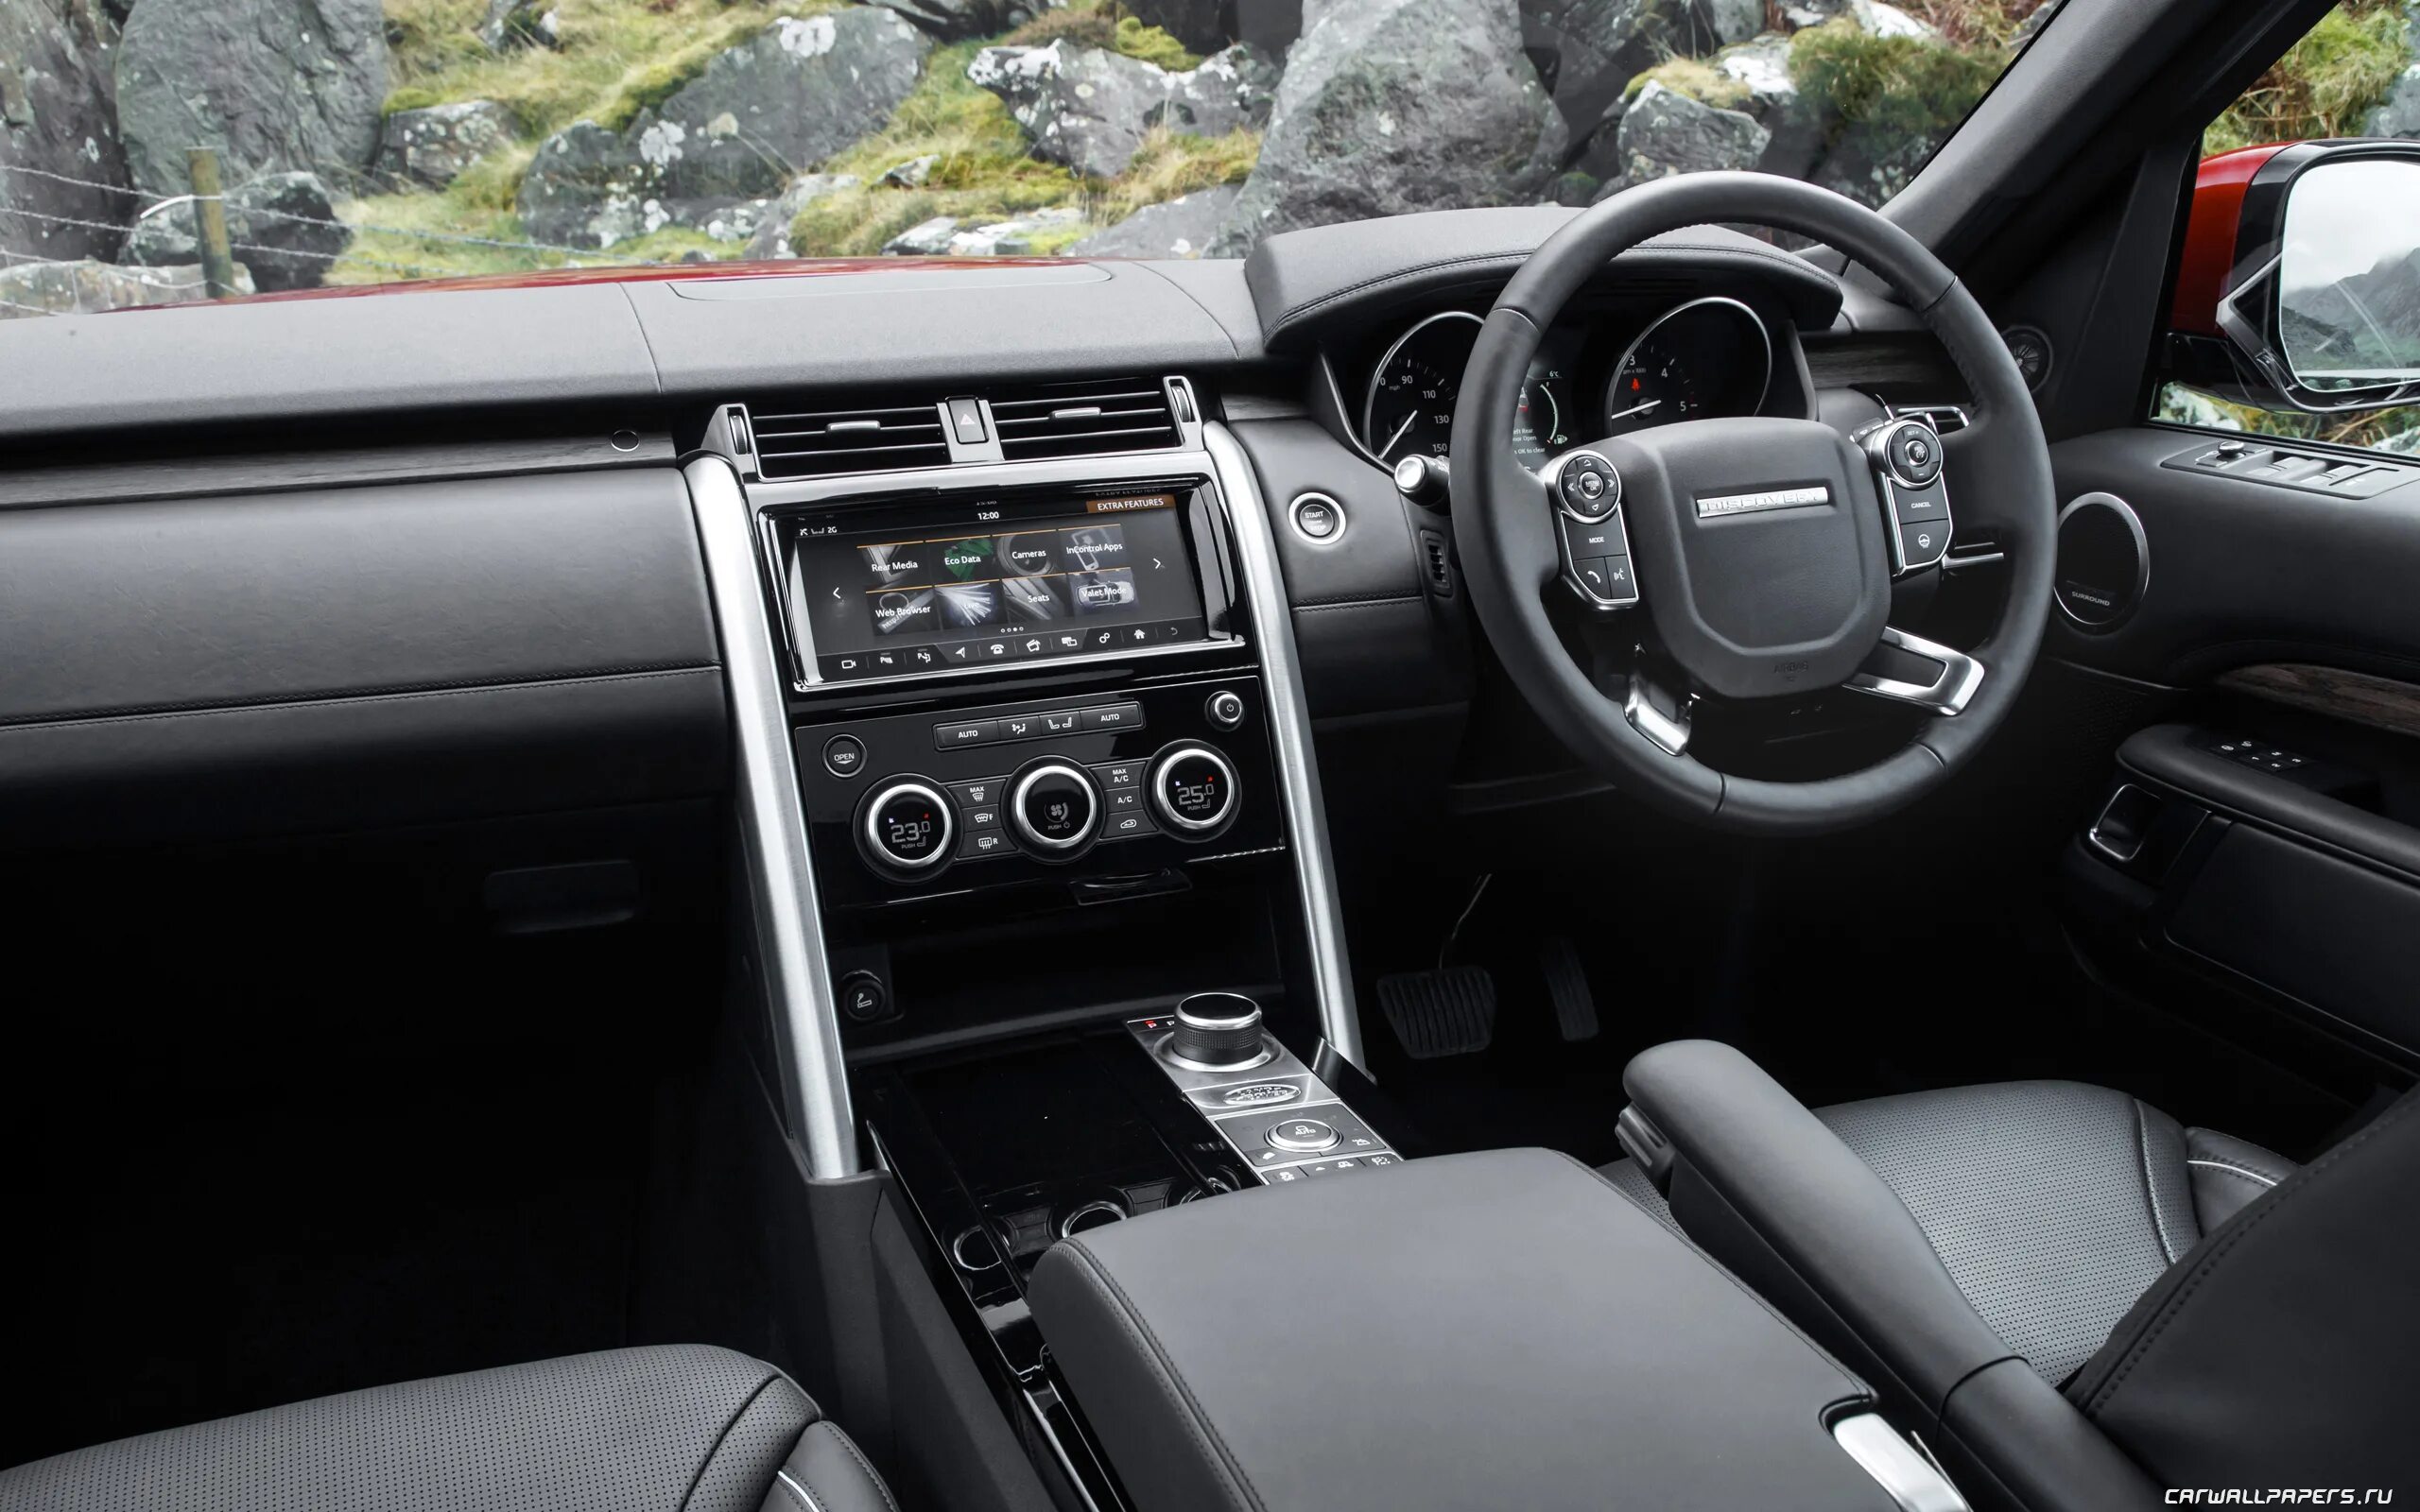 Дискавери 2018. Land Rover Discovery 2018. Land Rover Discovery 2017 Interior. Land Rover Discovery 5 2023. Рендж Ровер Дискавери 2018.